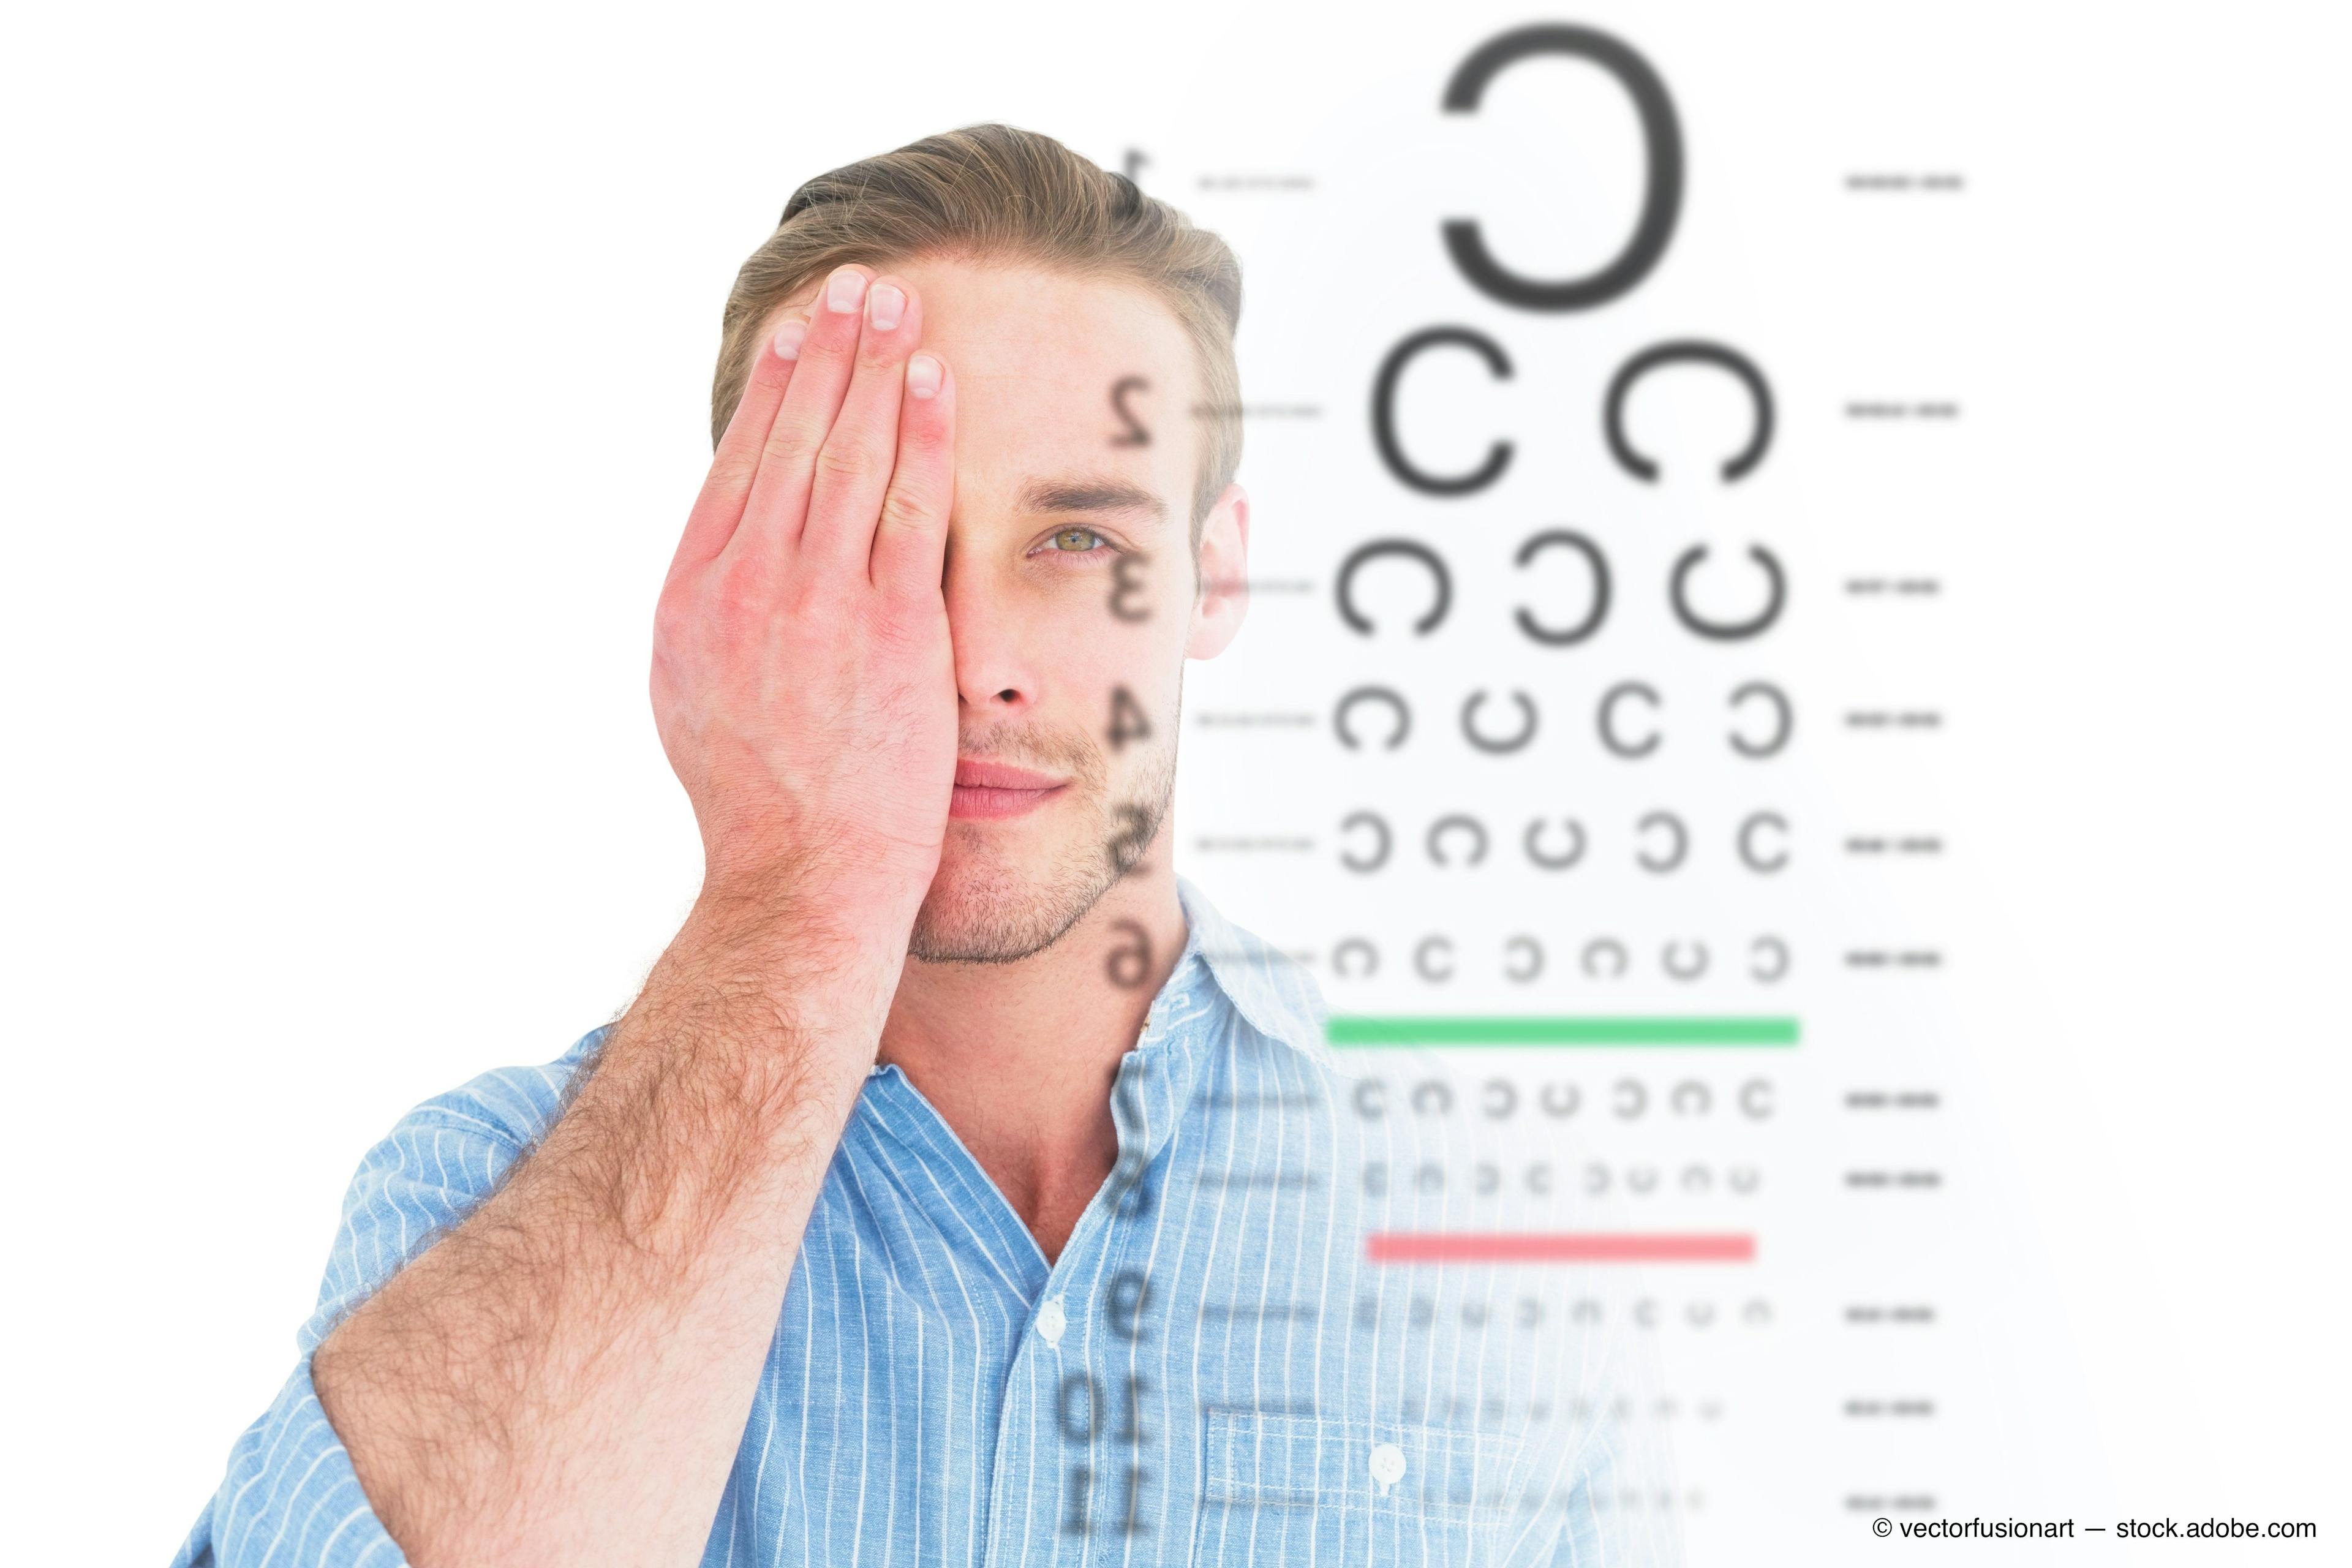 Blog: How presbyopic patients can determine their dominant eye